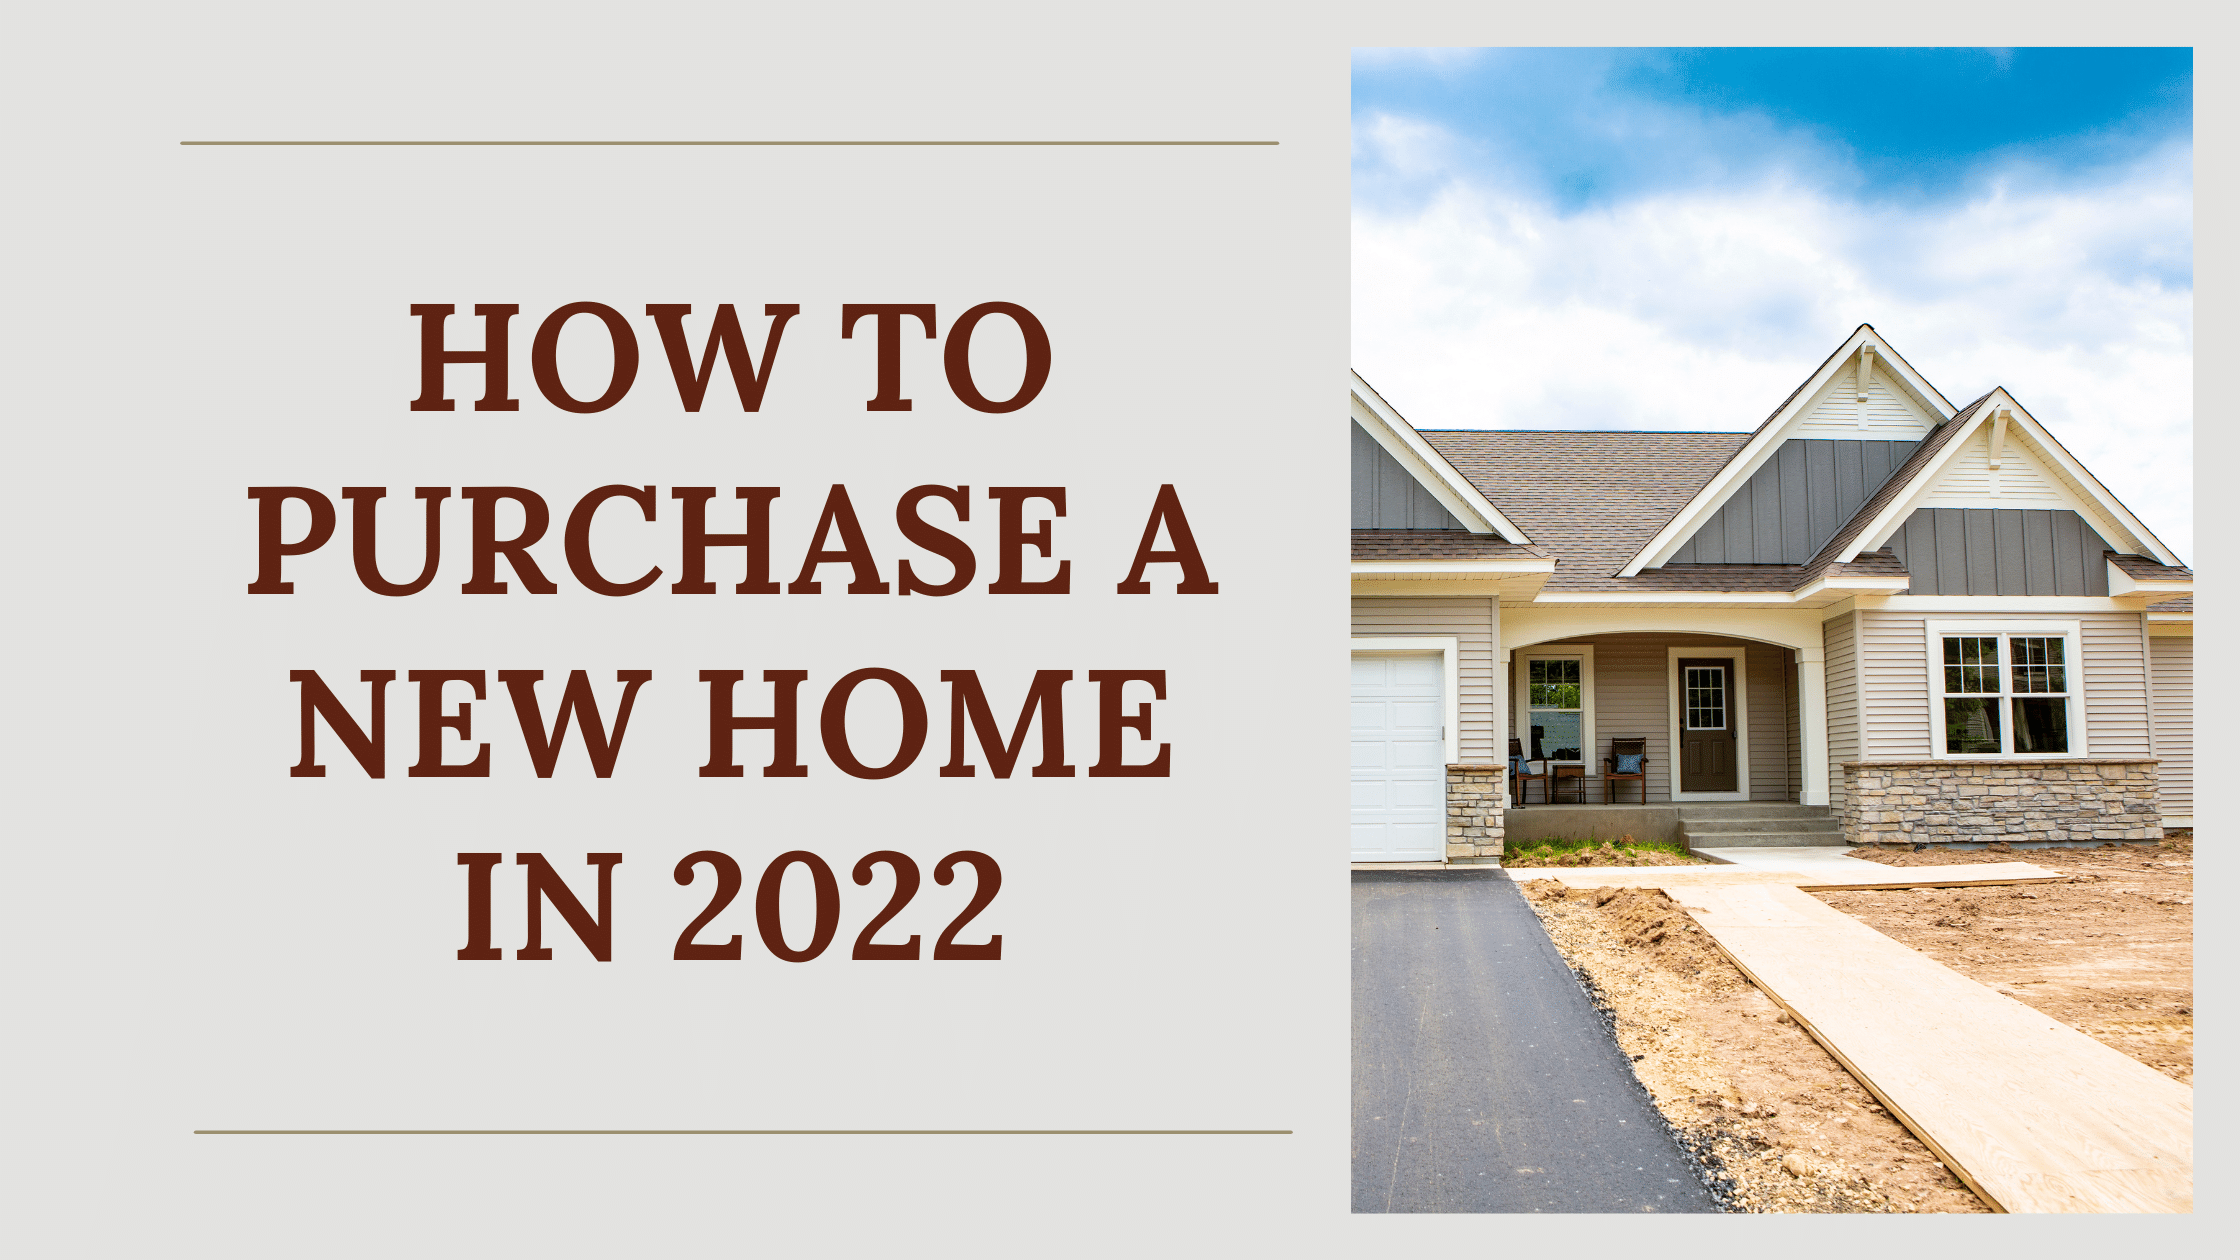 HOW TO PURCHASE A NEW HOME IN 2022